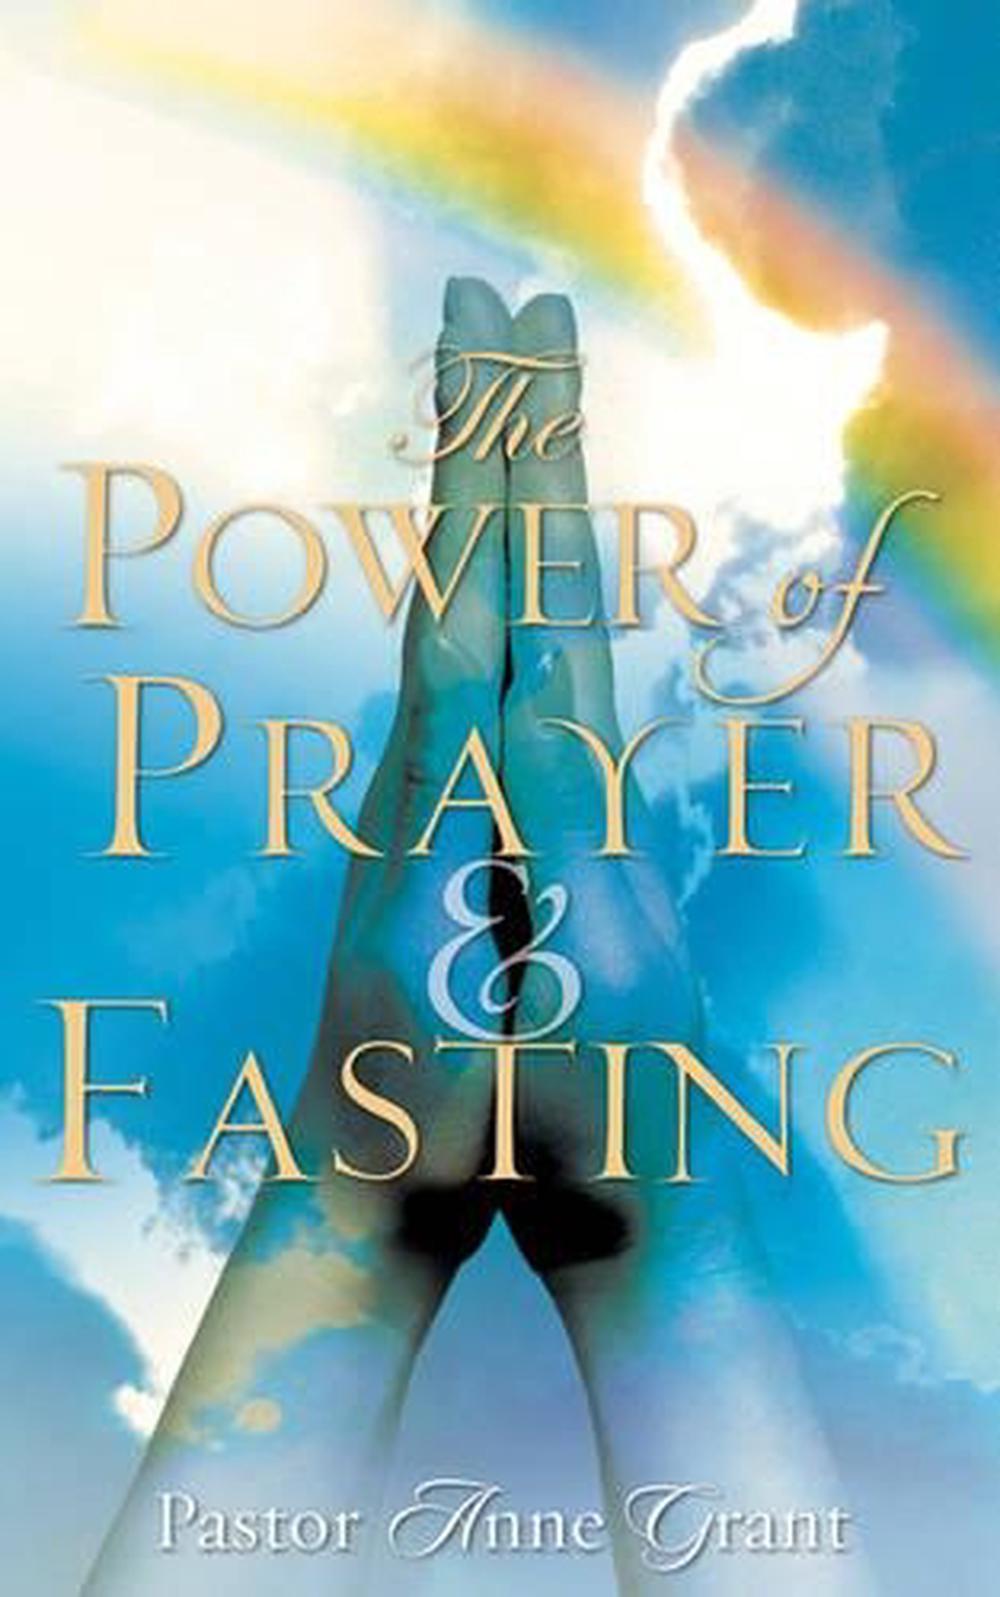 The Power of Prayer & Fasting by Anne Grant (English) Paperback Book ...